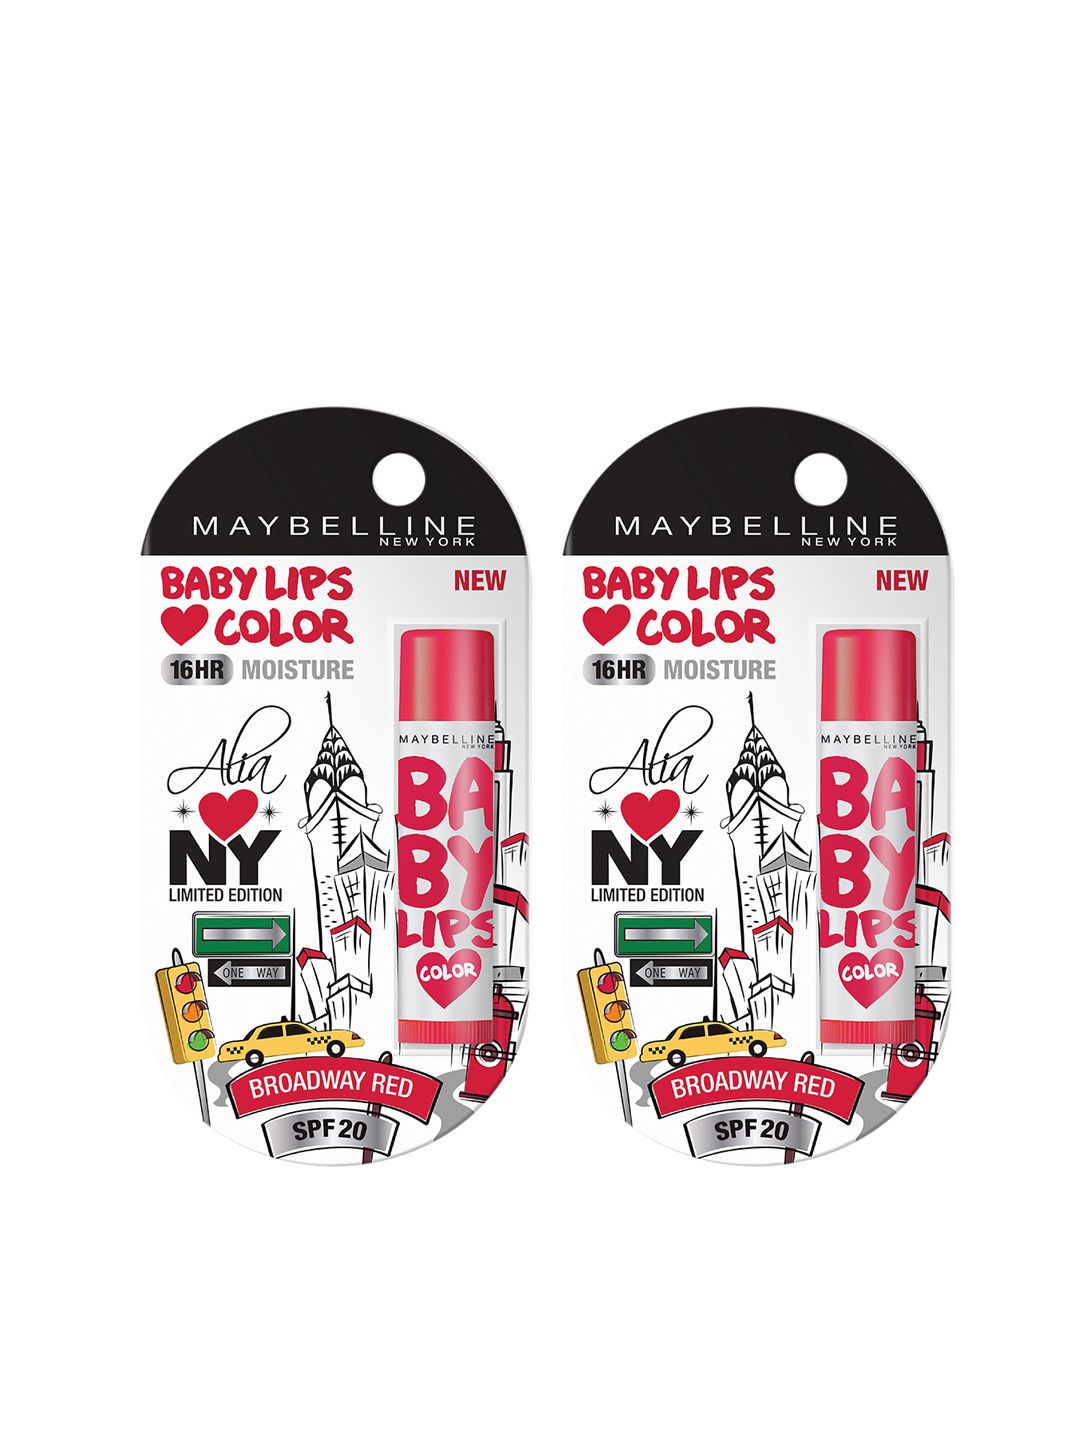 Maybelline Pack of 2 Broadway Red Alia Loves New York Baby Lips 4g Price in India